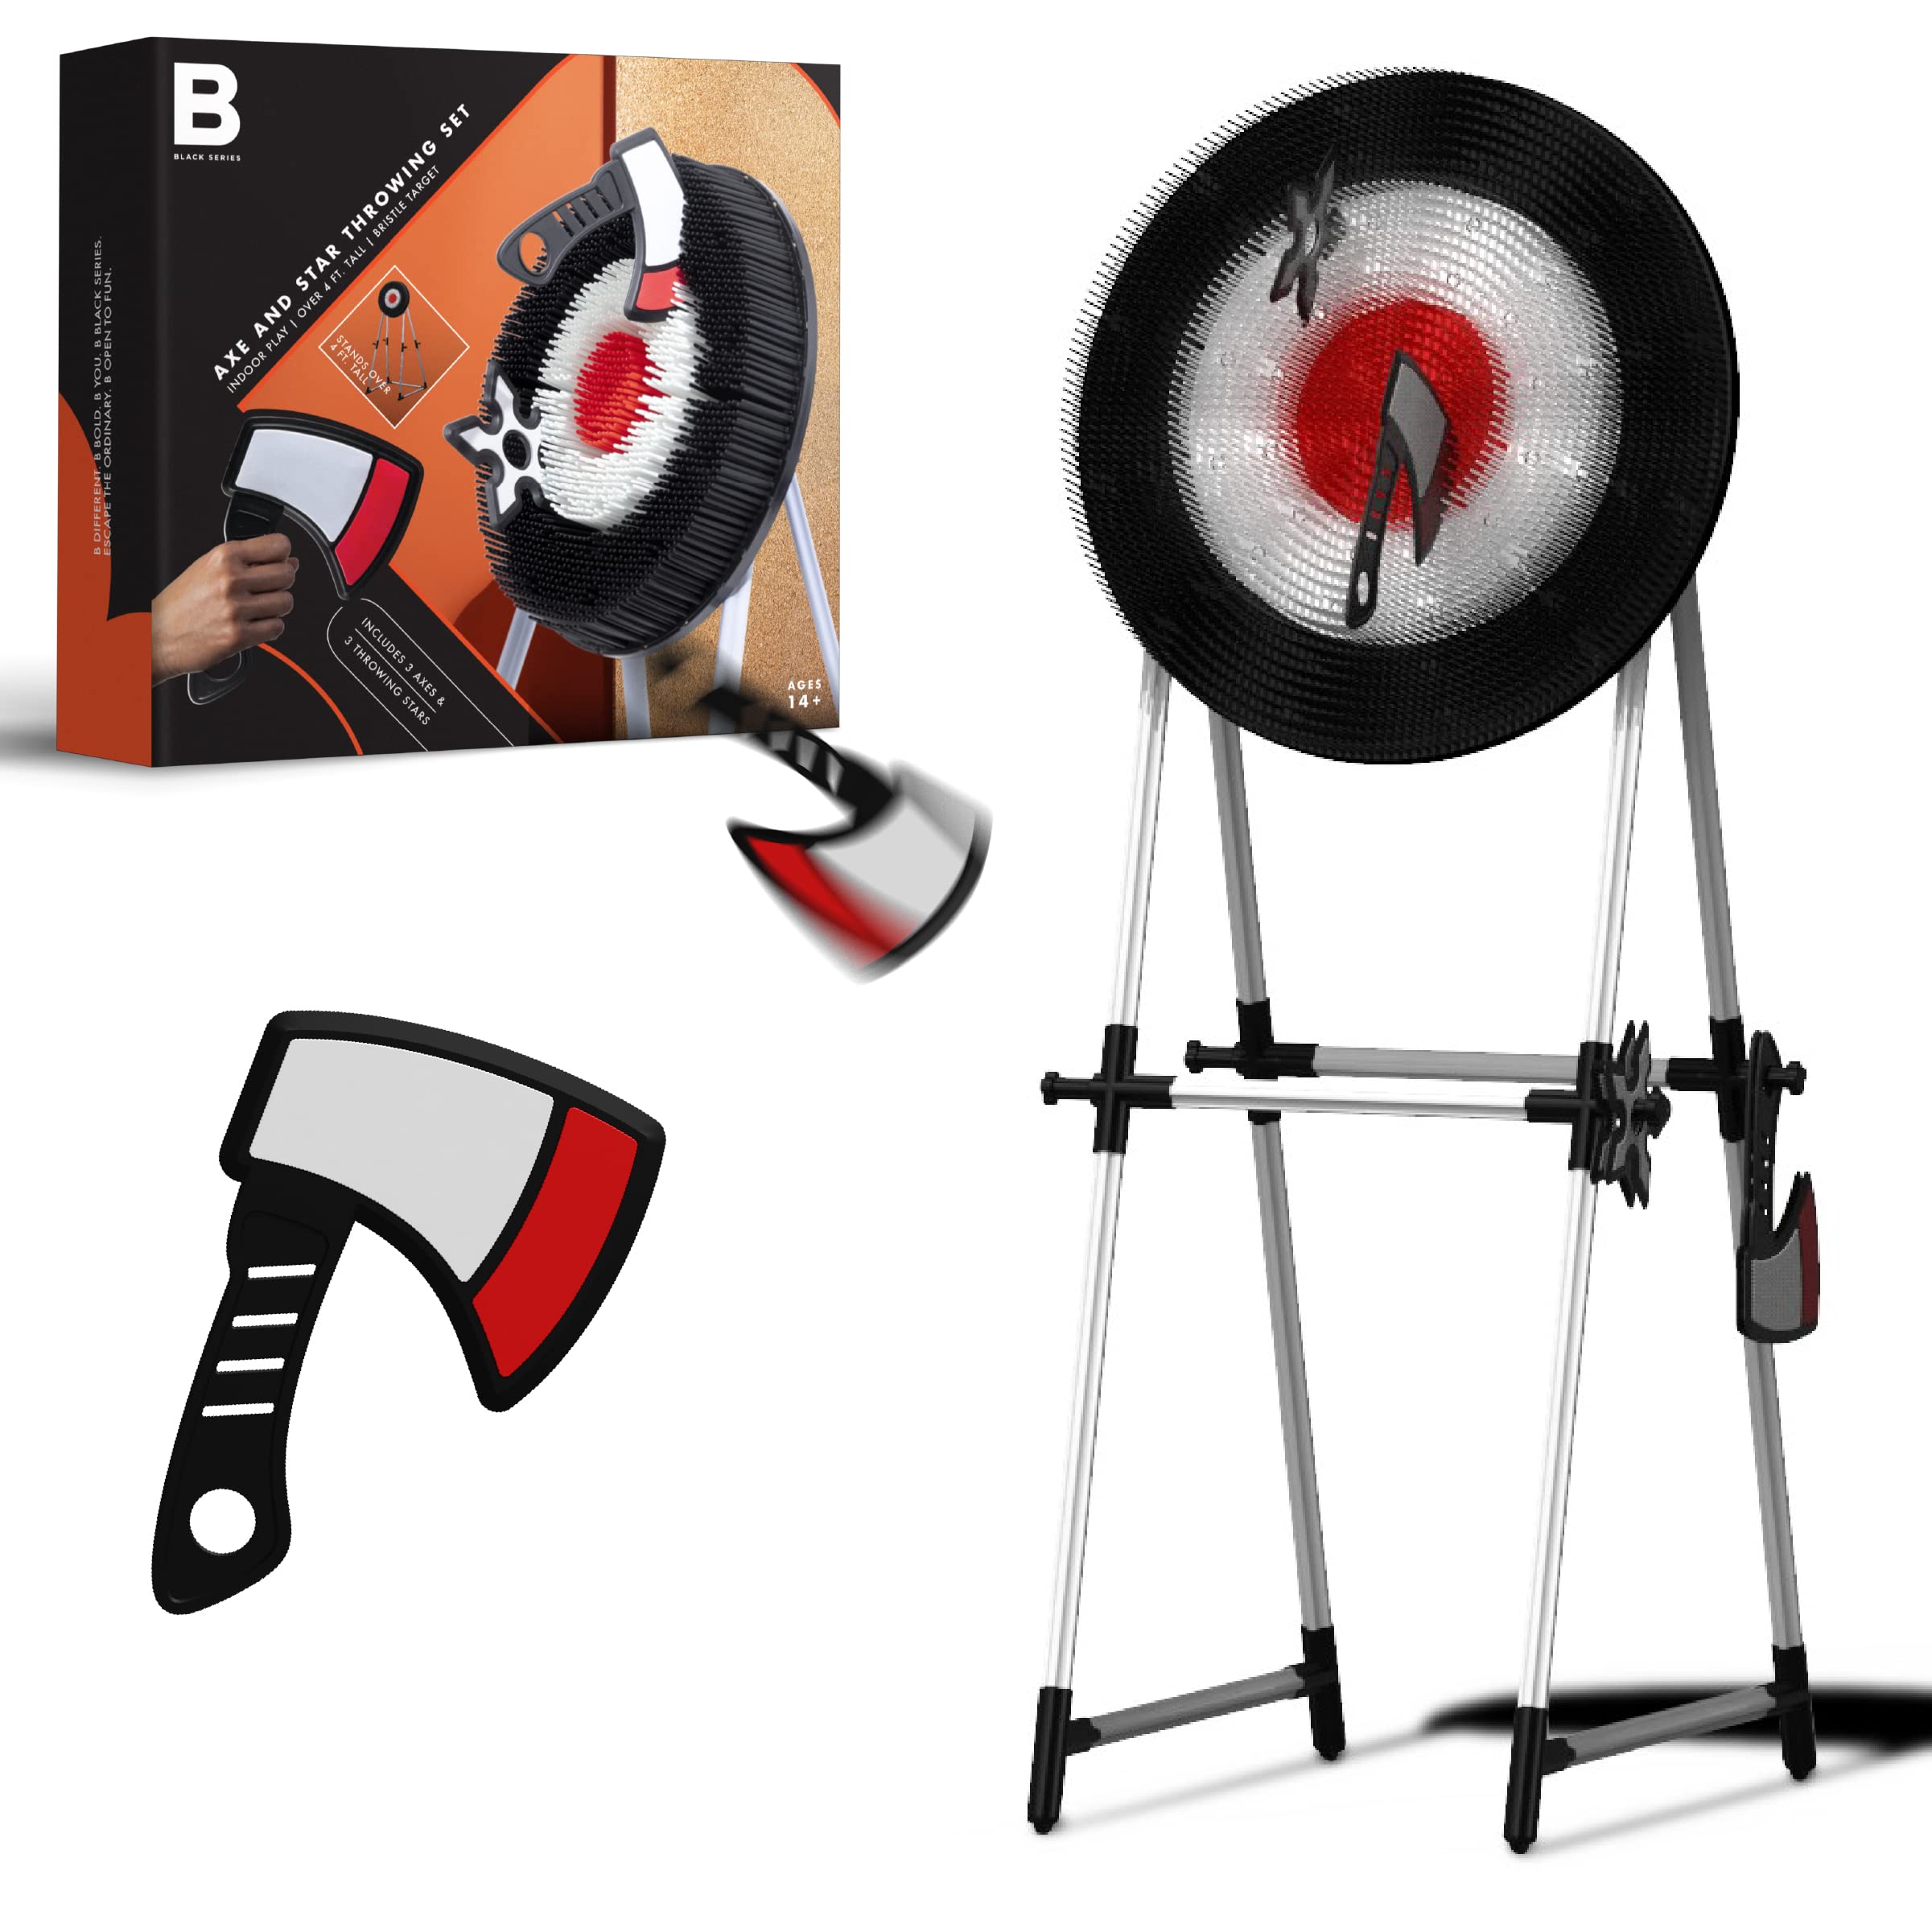 The Black Series Axe & Star Throwing Target Set $30 + Free Shipping w/ Prime or on $35+